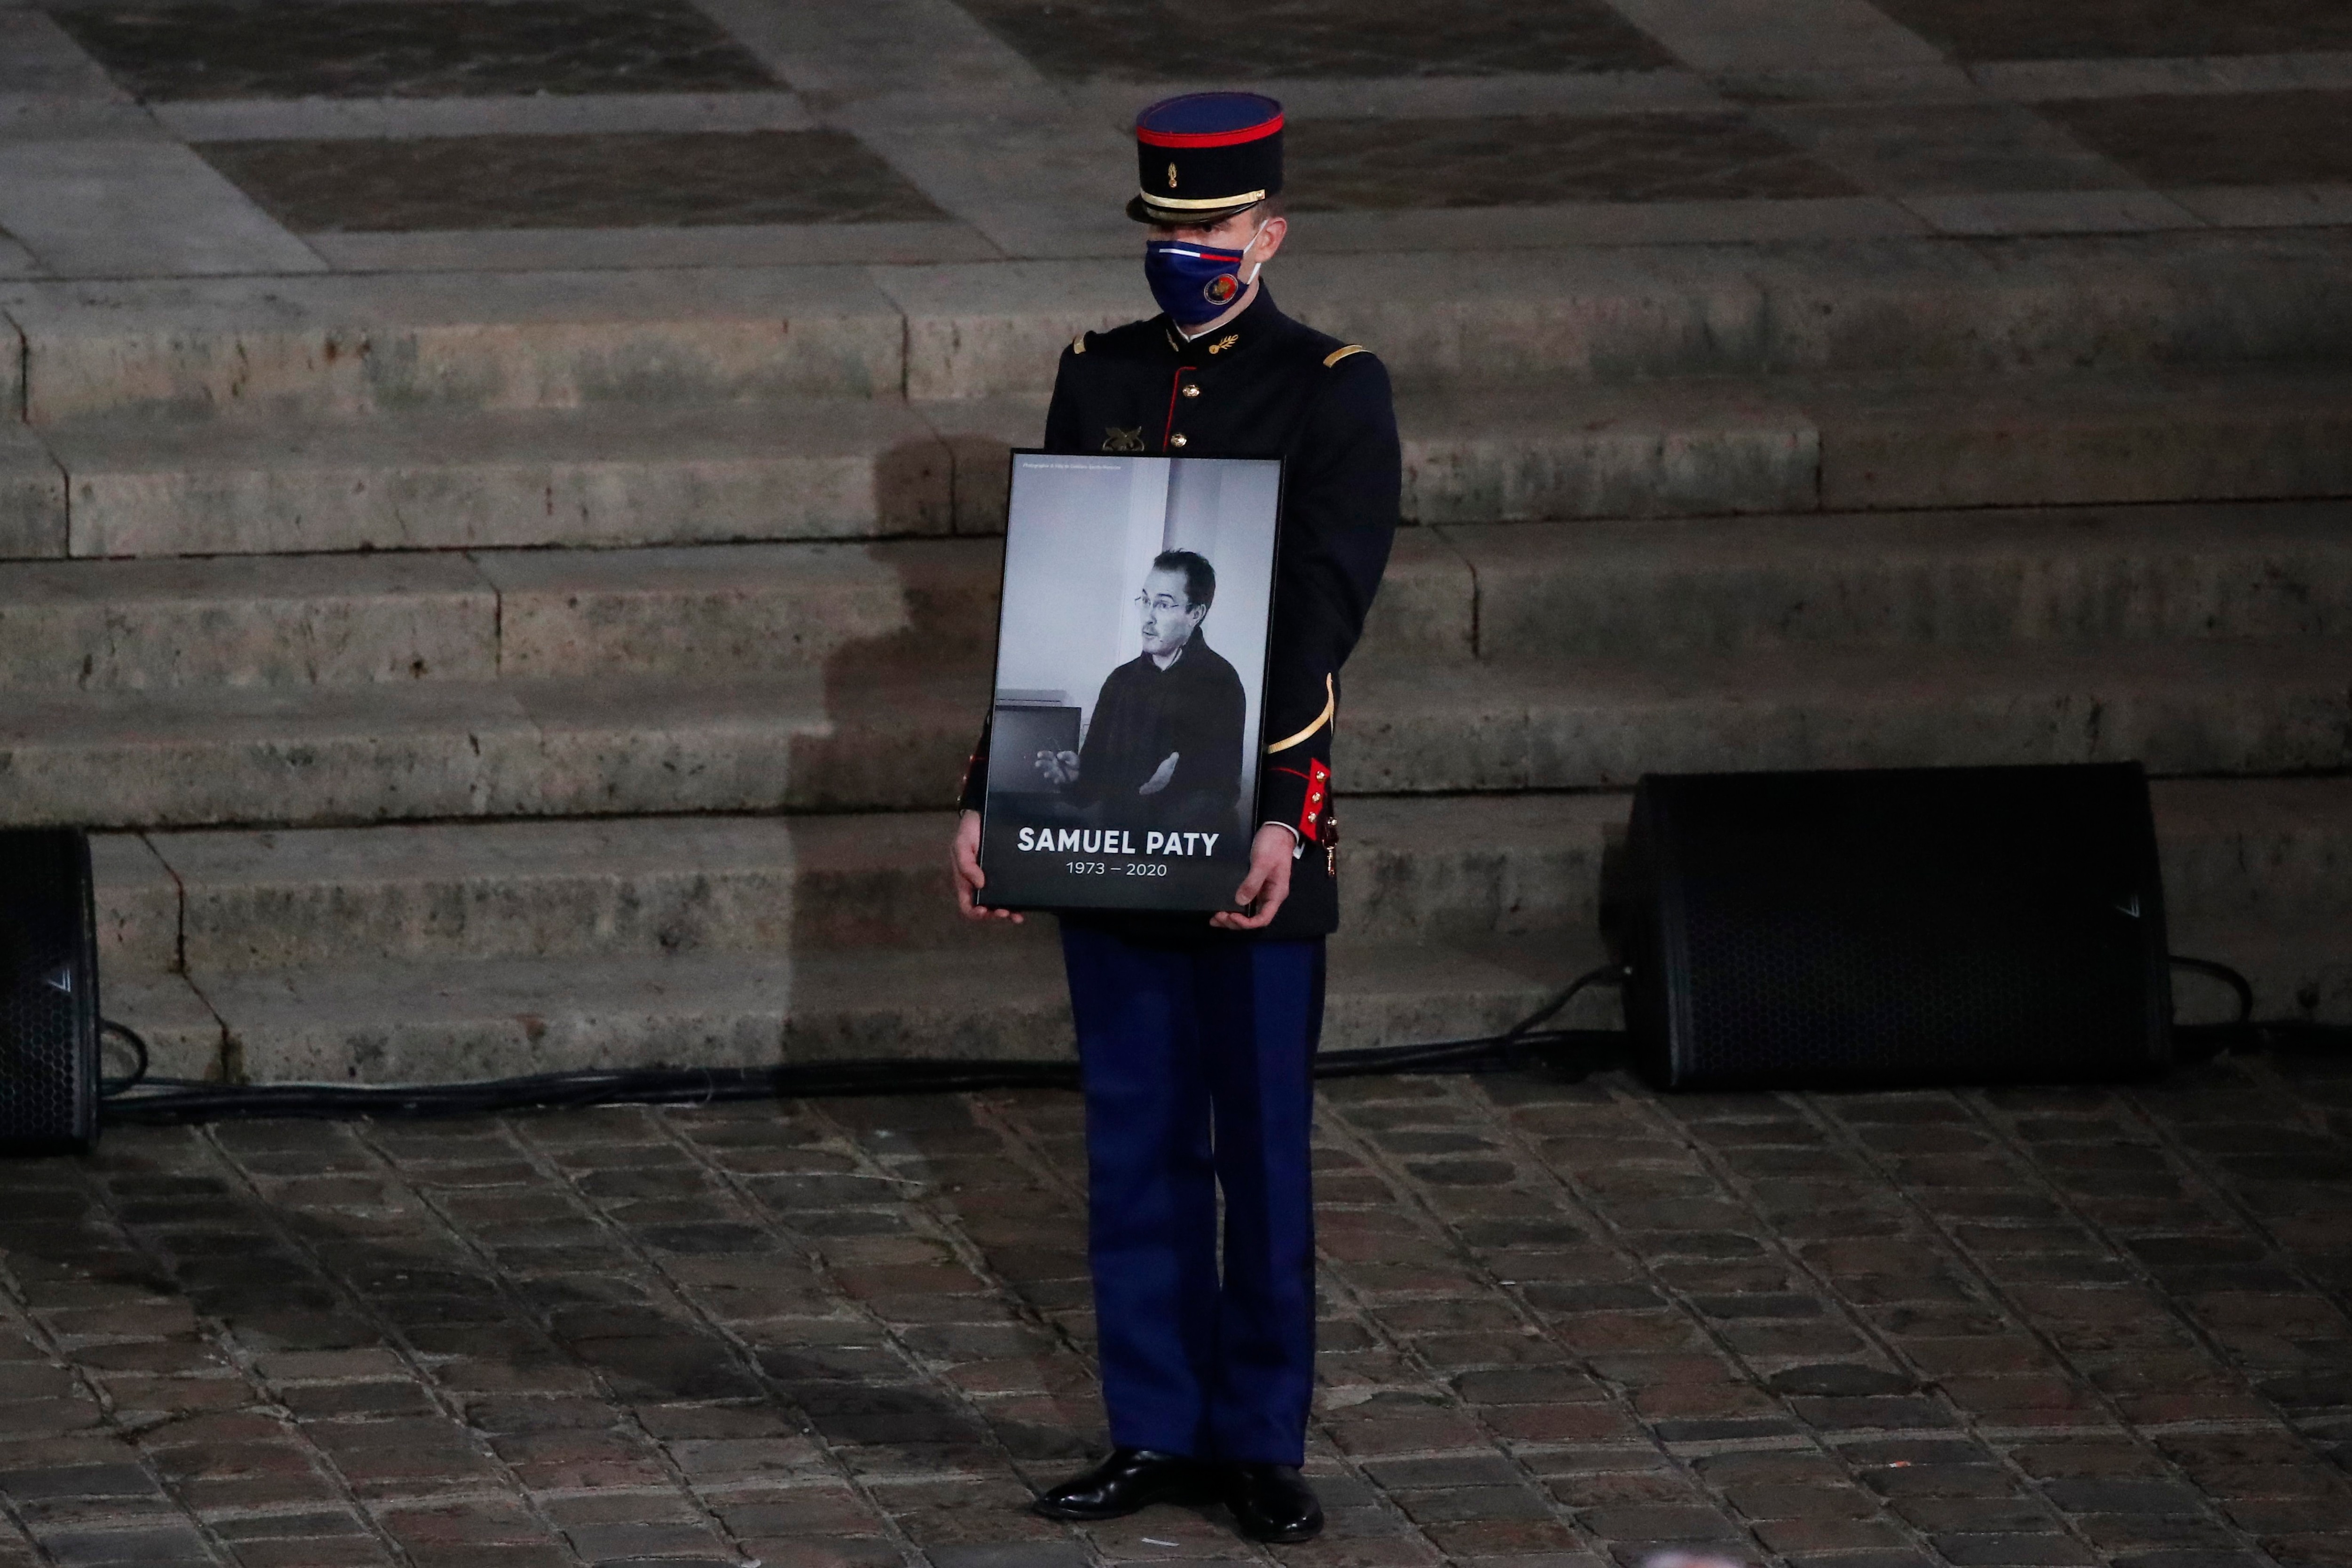  A Republican Guard holds a portrait of Samuel Paty in the courtyard of the Sorbonne university during a national memorial event, in Paris.